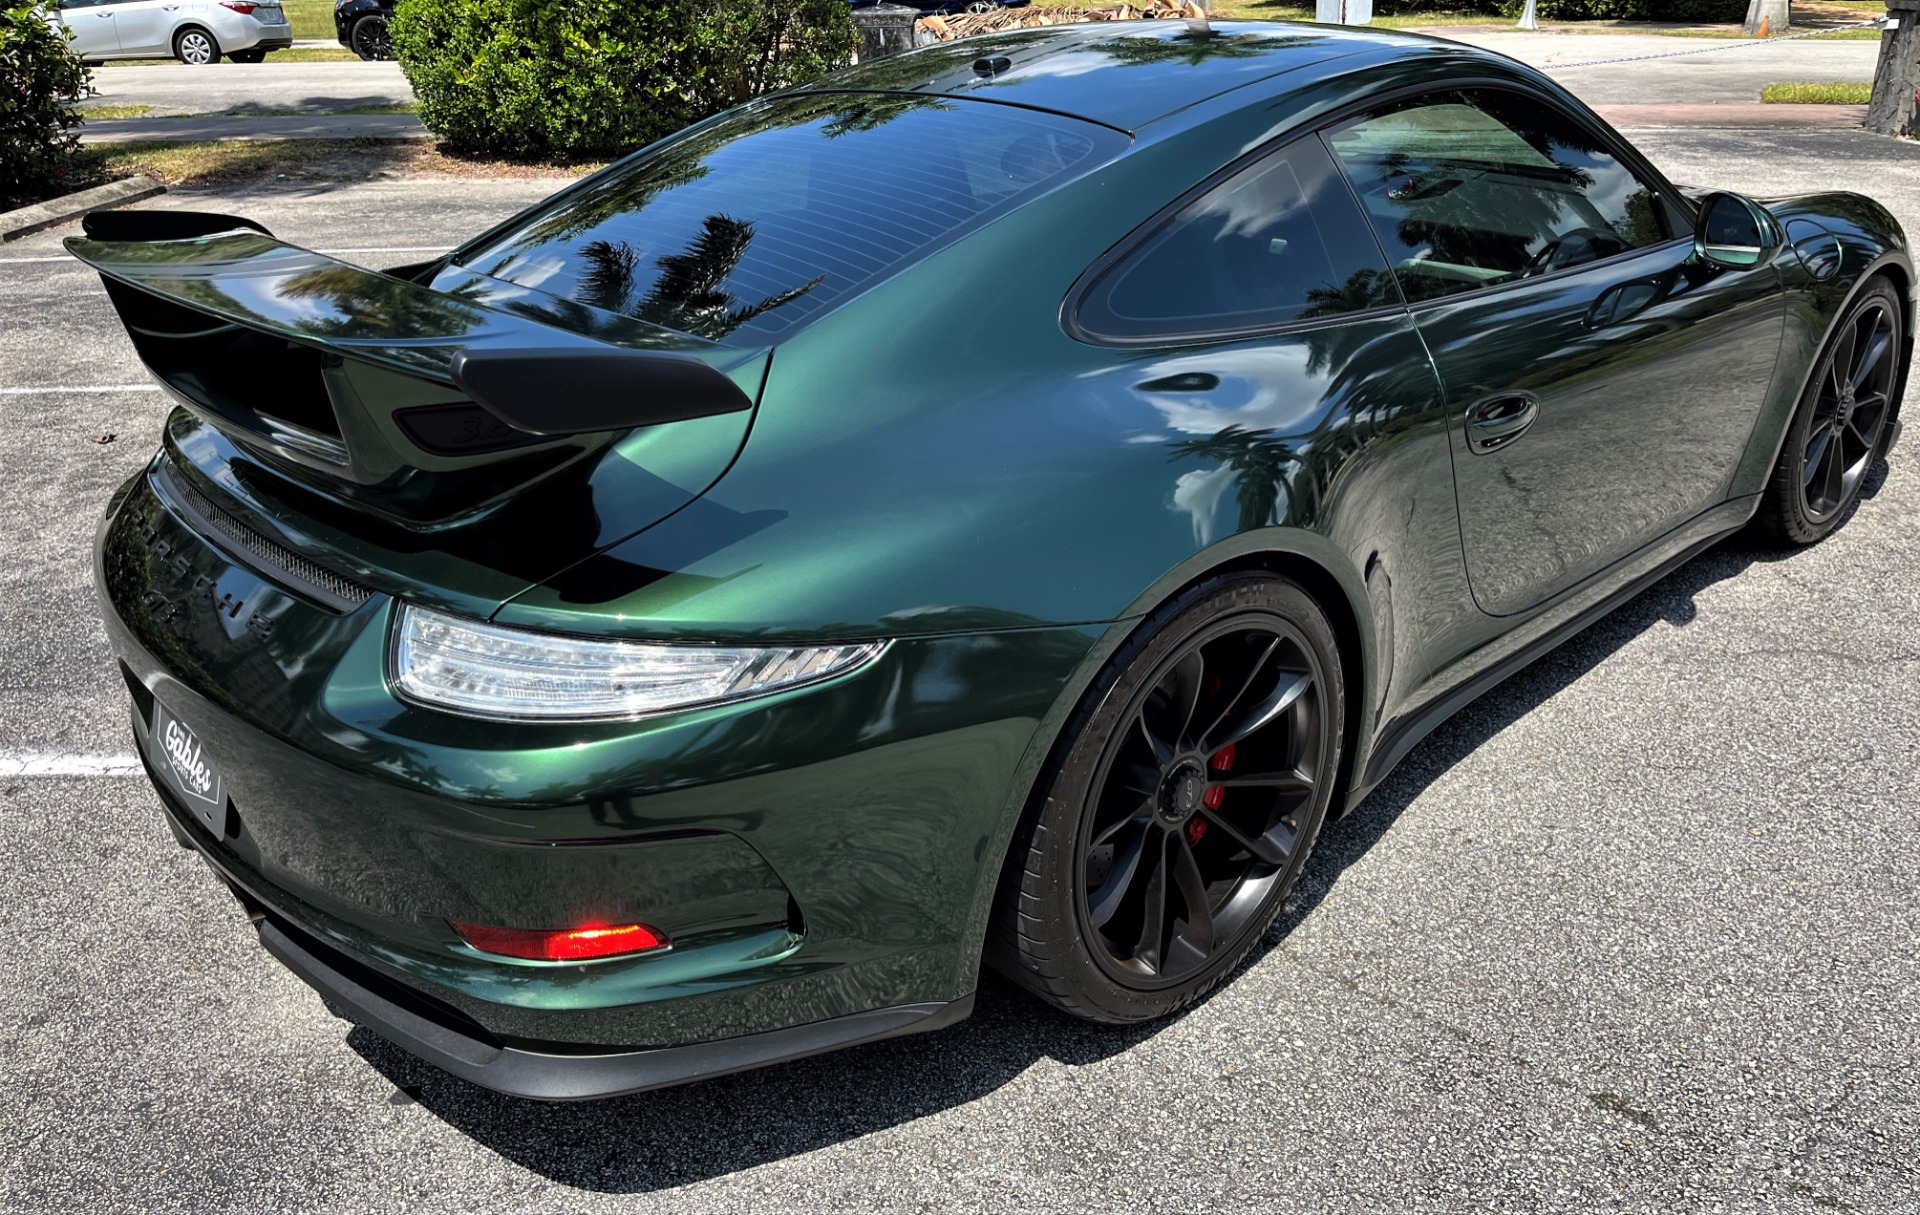 Used 2015 Porsche 911 GT3 For Sale ($156,850) | The Gables Sports Cars ...